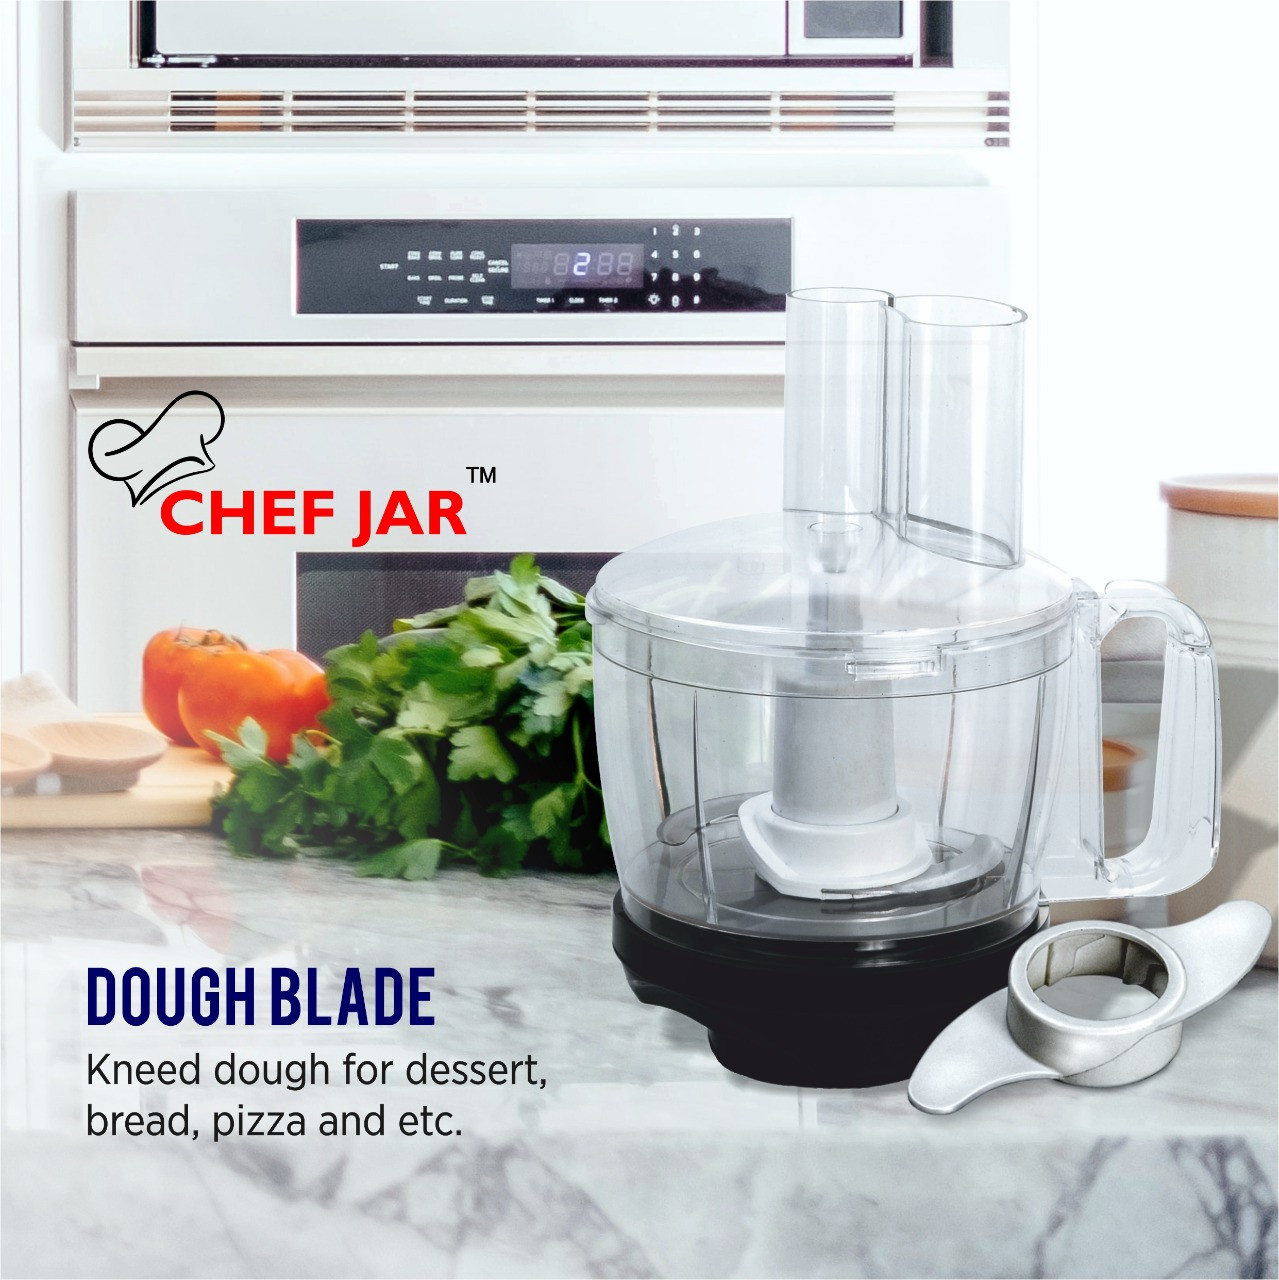 chef-jar-all-in-one-a-complete-food-processor-attachment-for-most-indian-mixer-grinders-compatible-with-all-preethi-premier-models-except-preethi-steele4